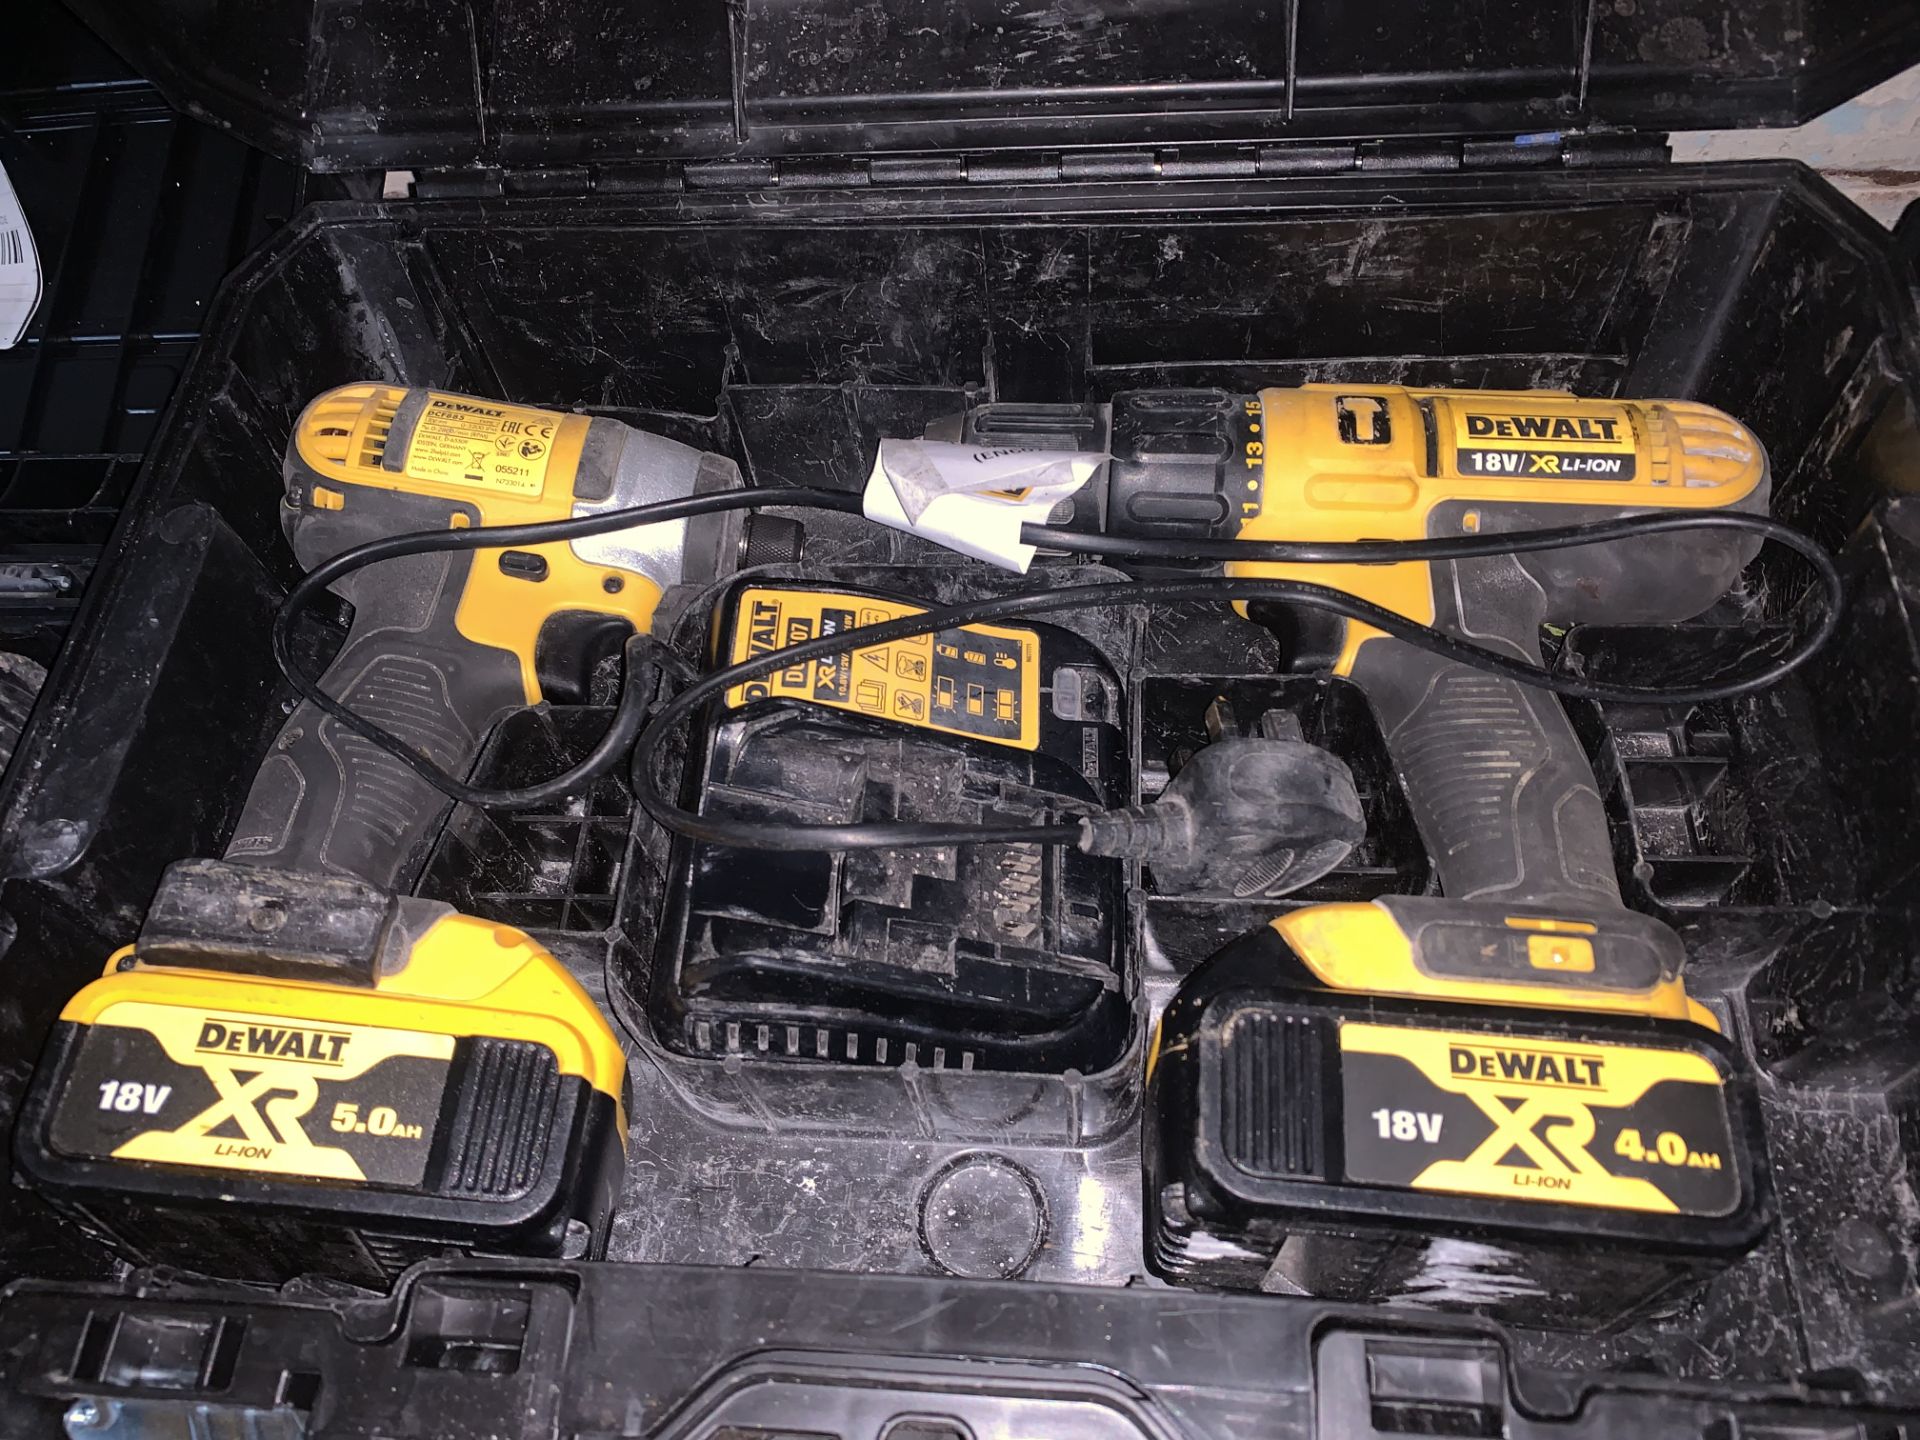 DEWALT DRILL AND IMPACT DRIVER TWIN SET COMES WITH 2 BATTERIES, CHARGER AND CARRY CASE (UNCHECKED)